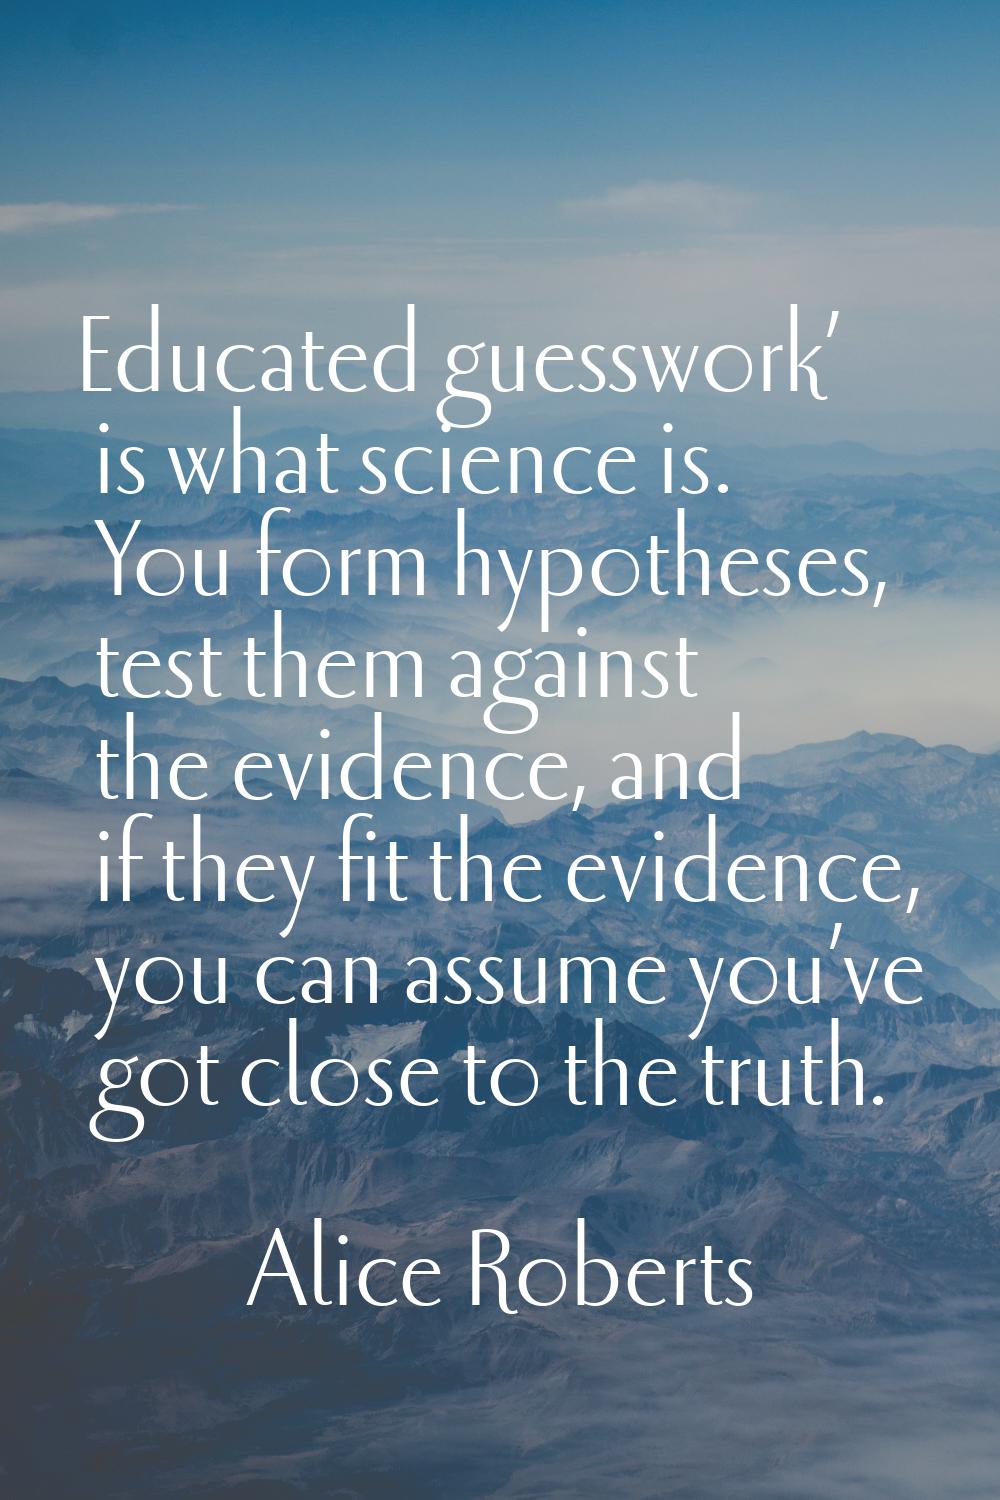 Educated guesswork’ is what science is. You form hypotheses, test them against the evidence, and if